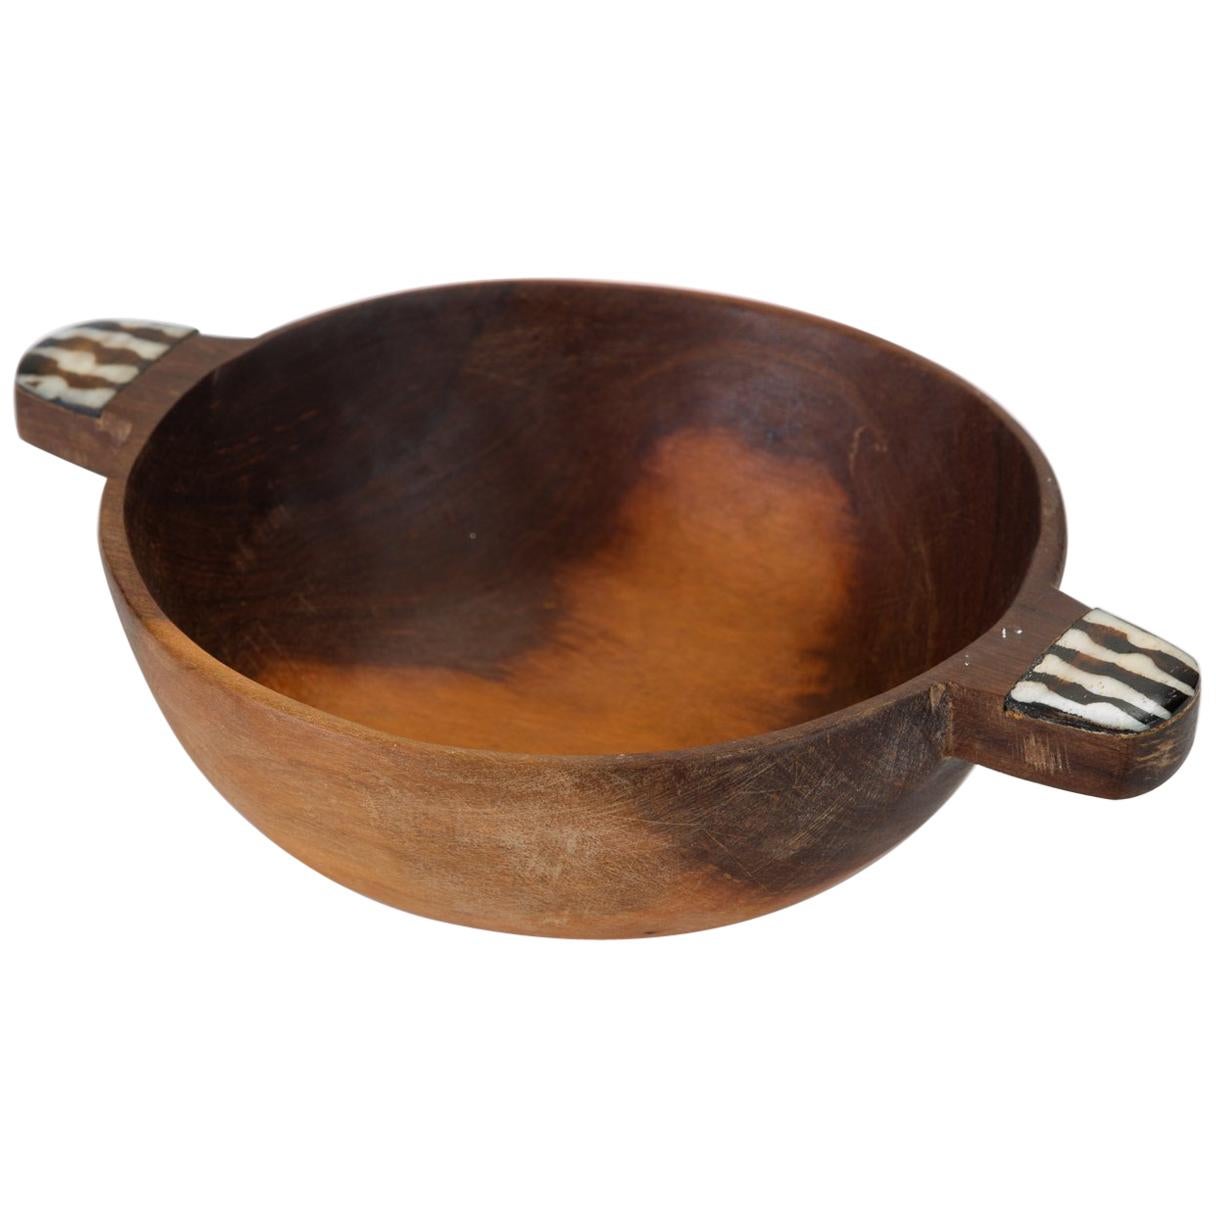 Hand Carved Sandalwood Bowl with Bone Inlay Handles